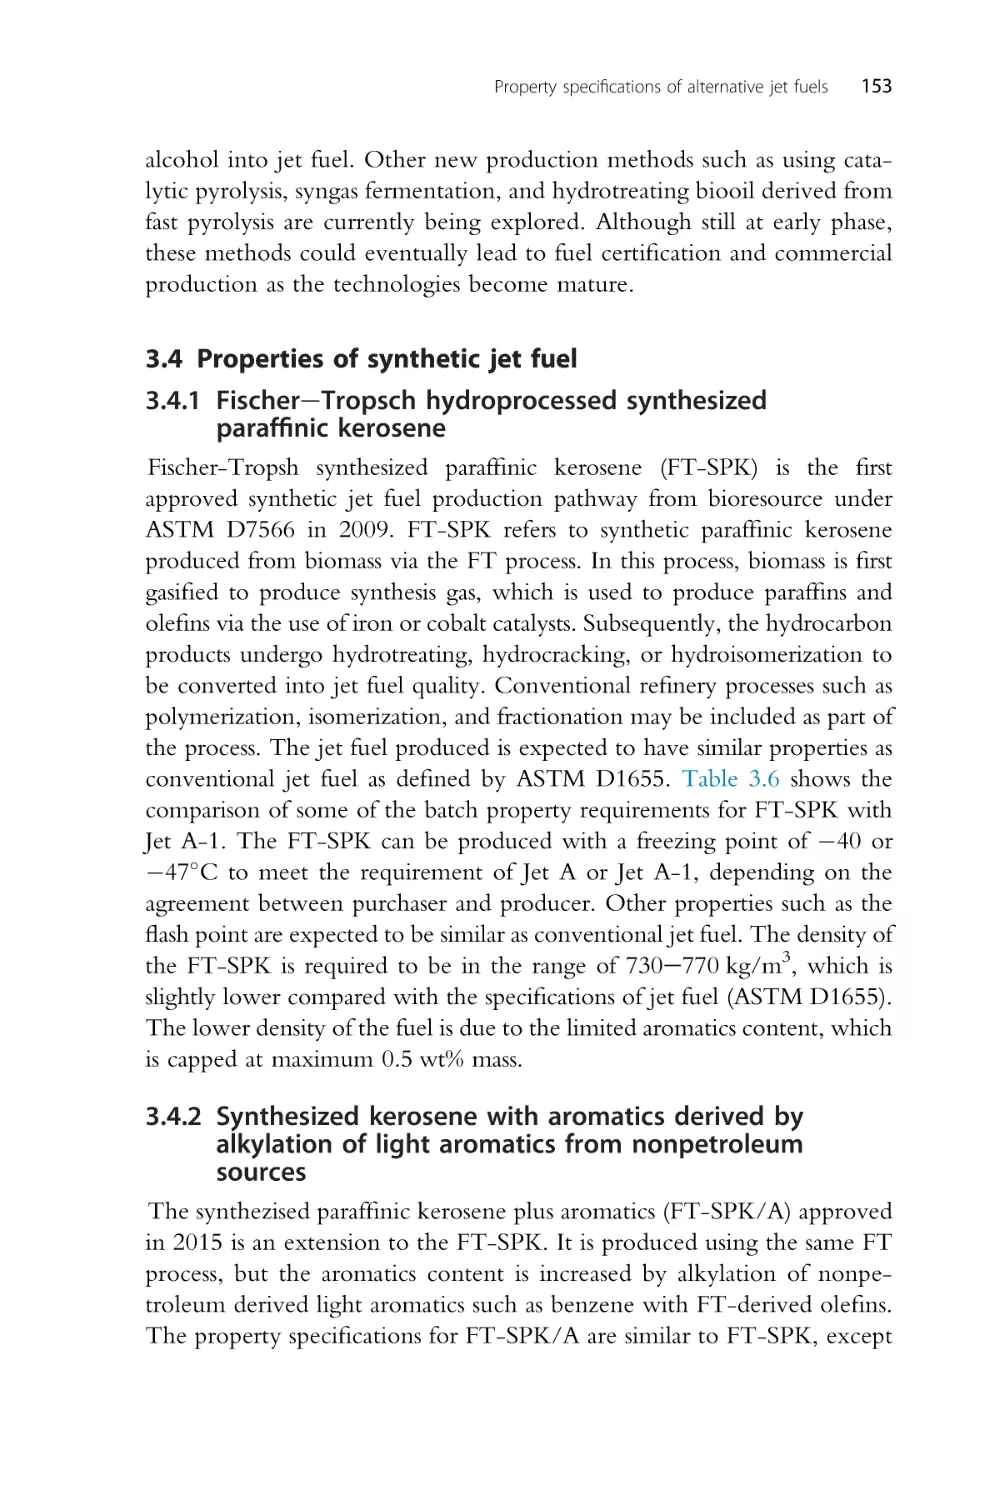 3.4 Properties of synthetic jet fuel
3.4.1 Fischer–Tropsch hydroprocessed synthesized paraffinic kerosene
3.4.2 Synthesized kerosene with aromatics derived by alkylation of light aromatics from nonpetroleum sources